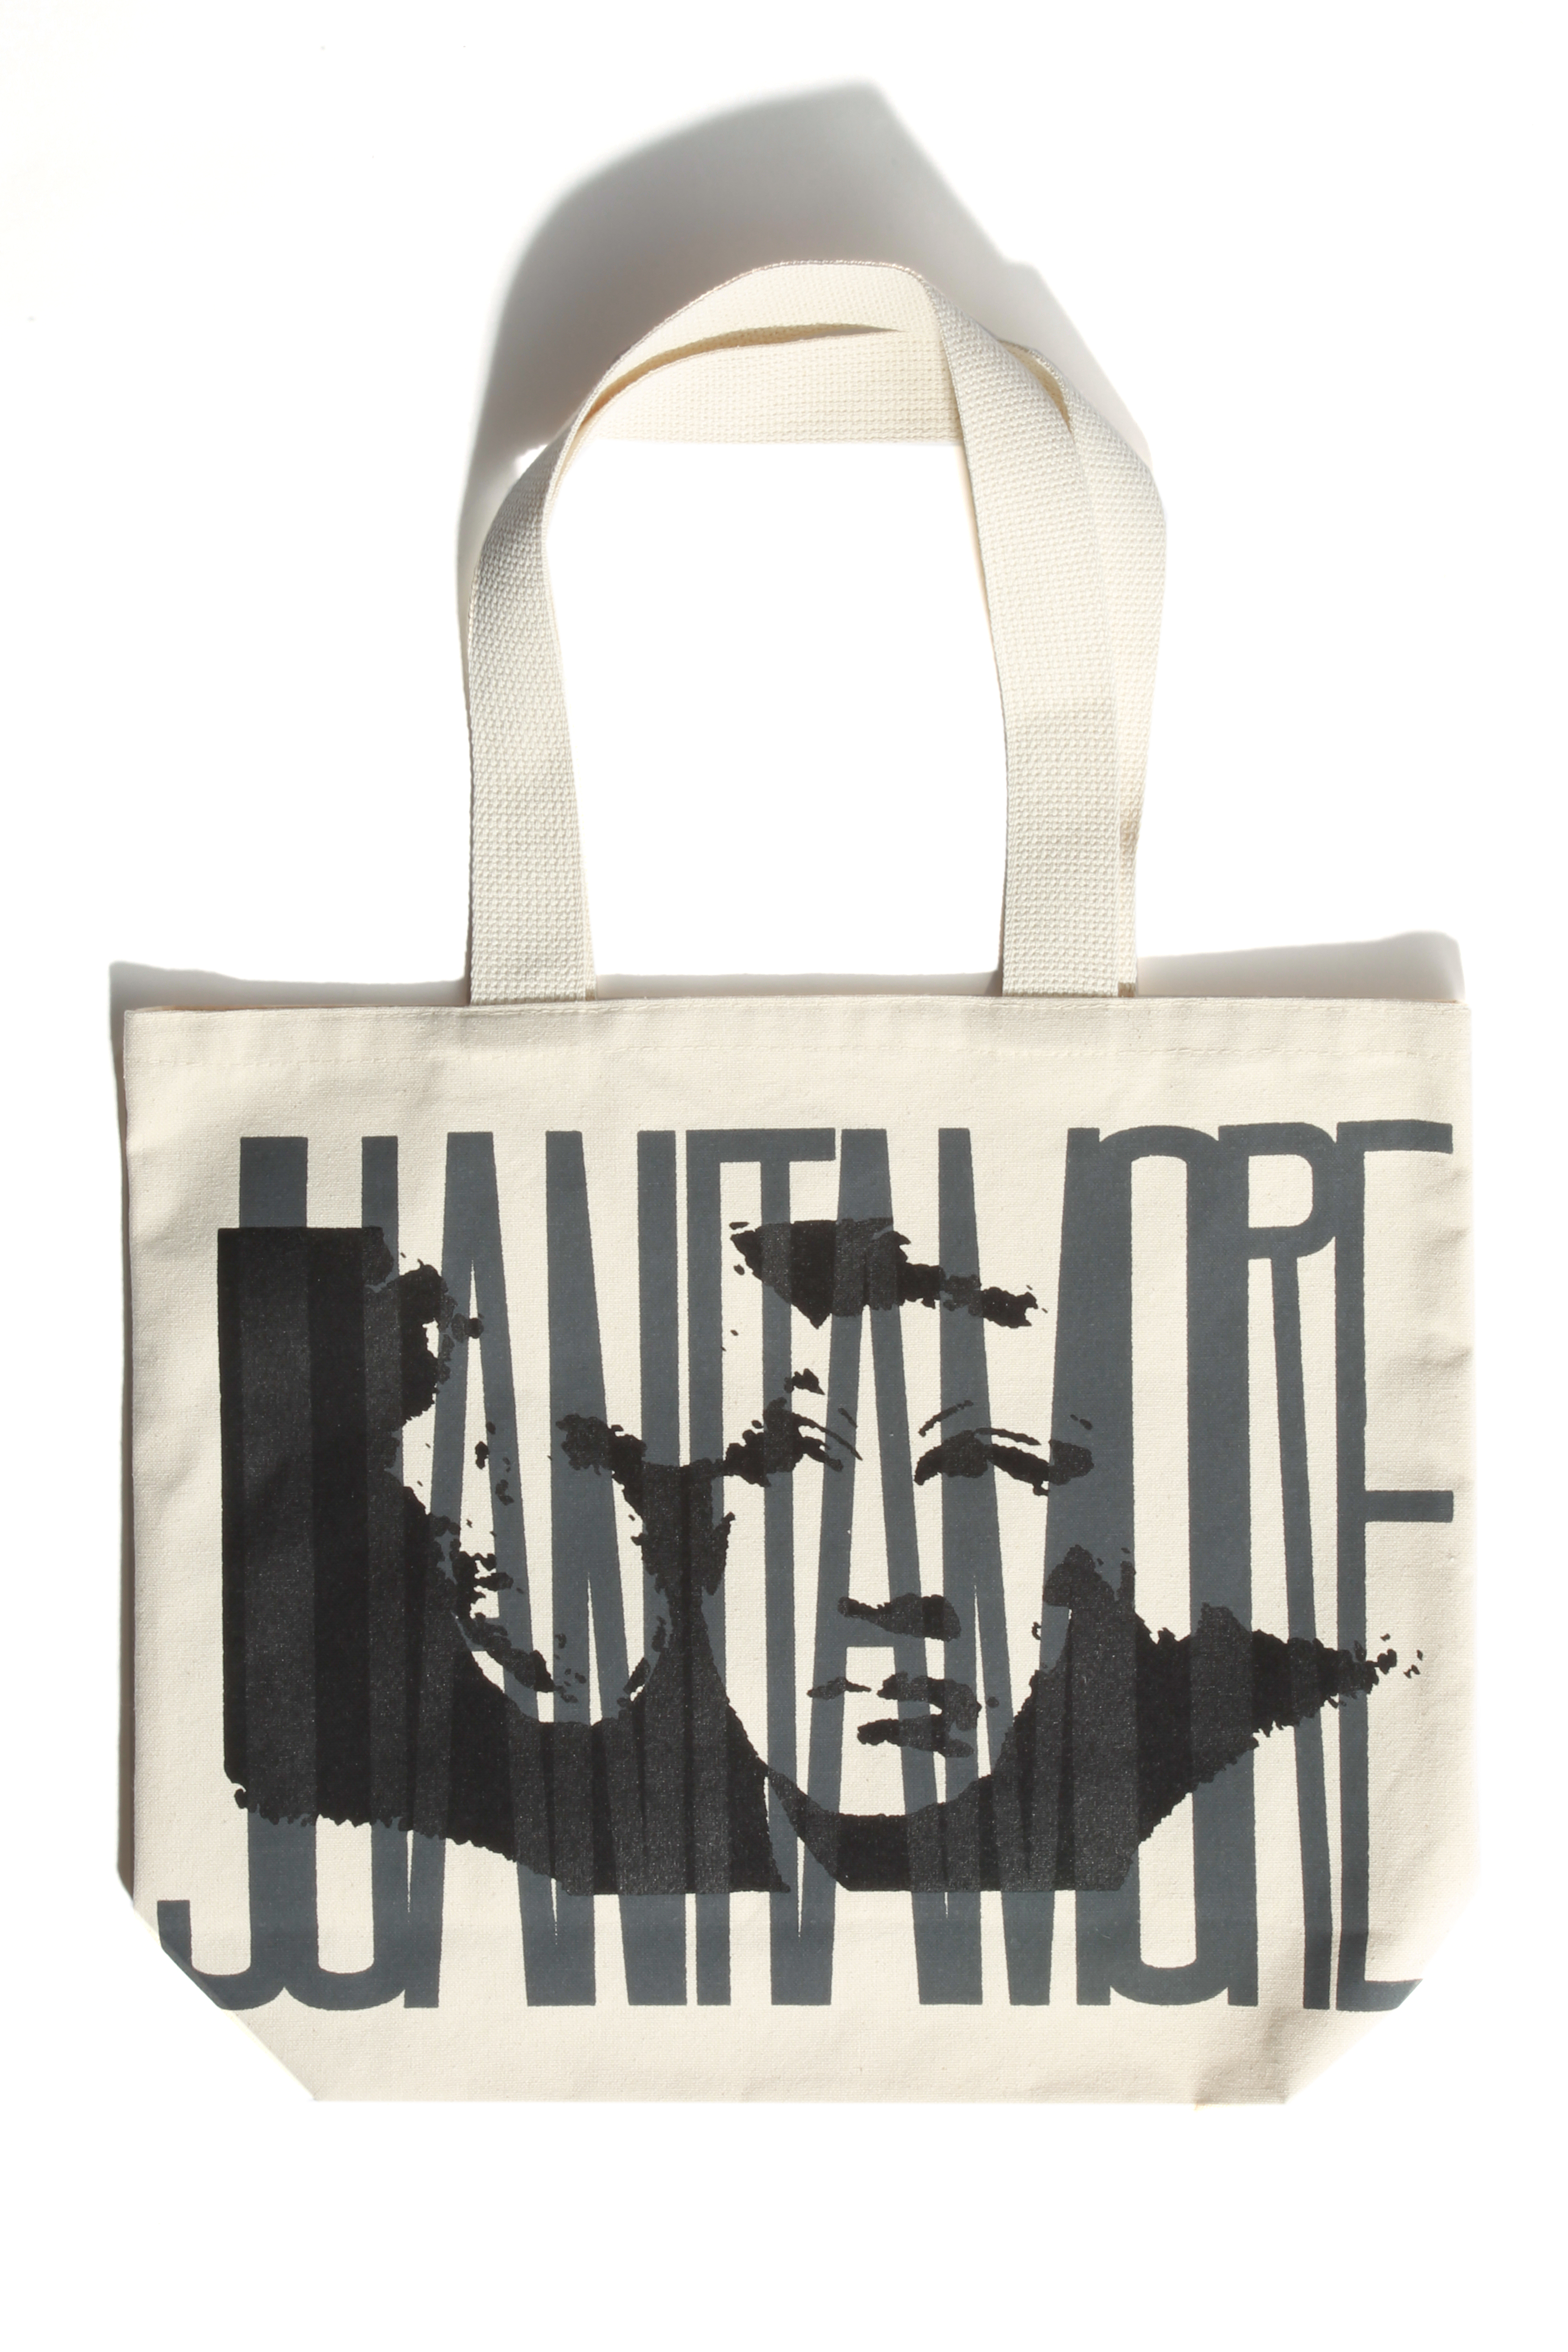 A tote designed by Jiawei Tang.